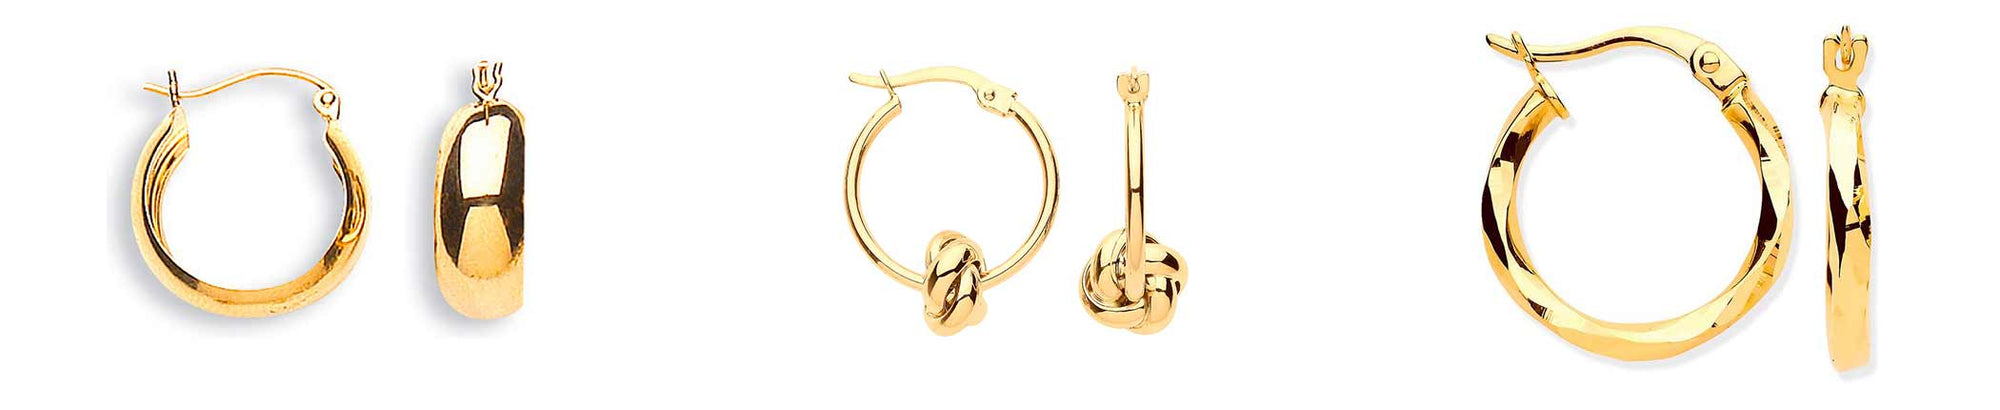 <font color=#000000>10 of the Best Small Gold Hoops</font>